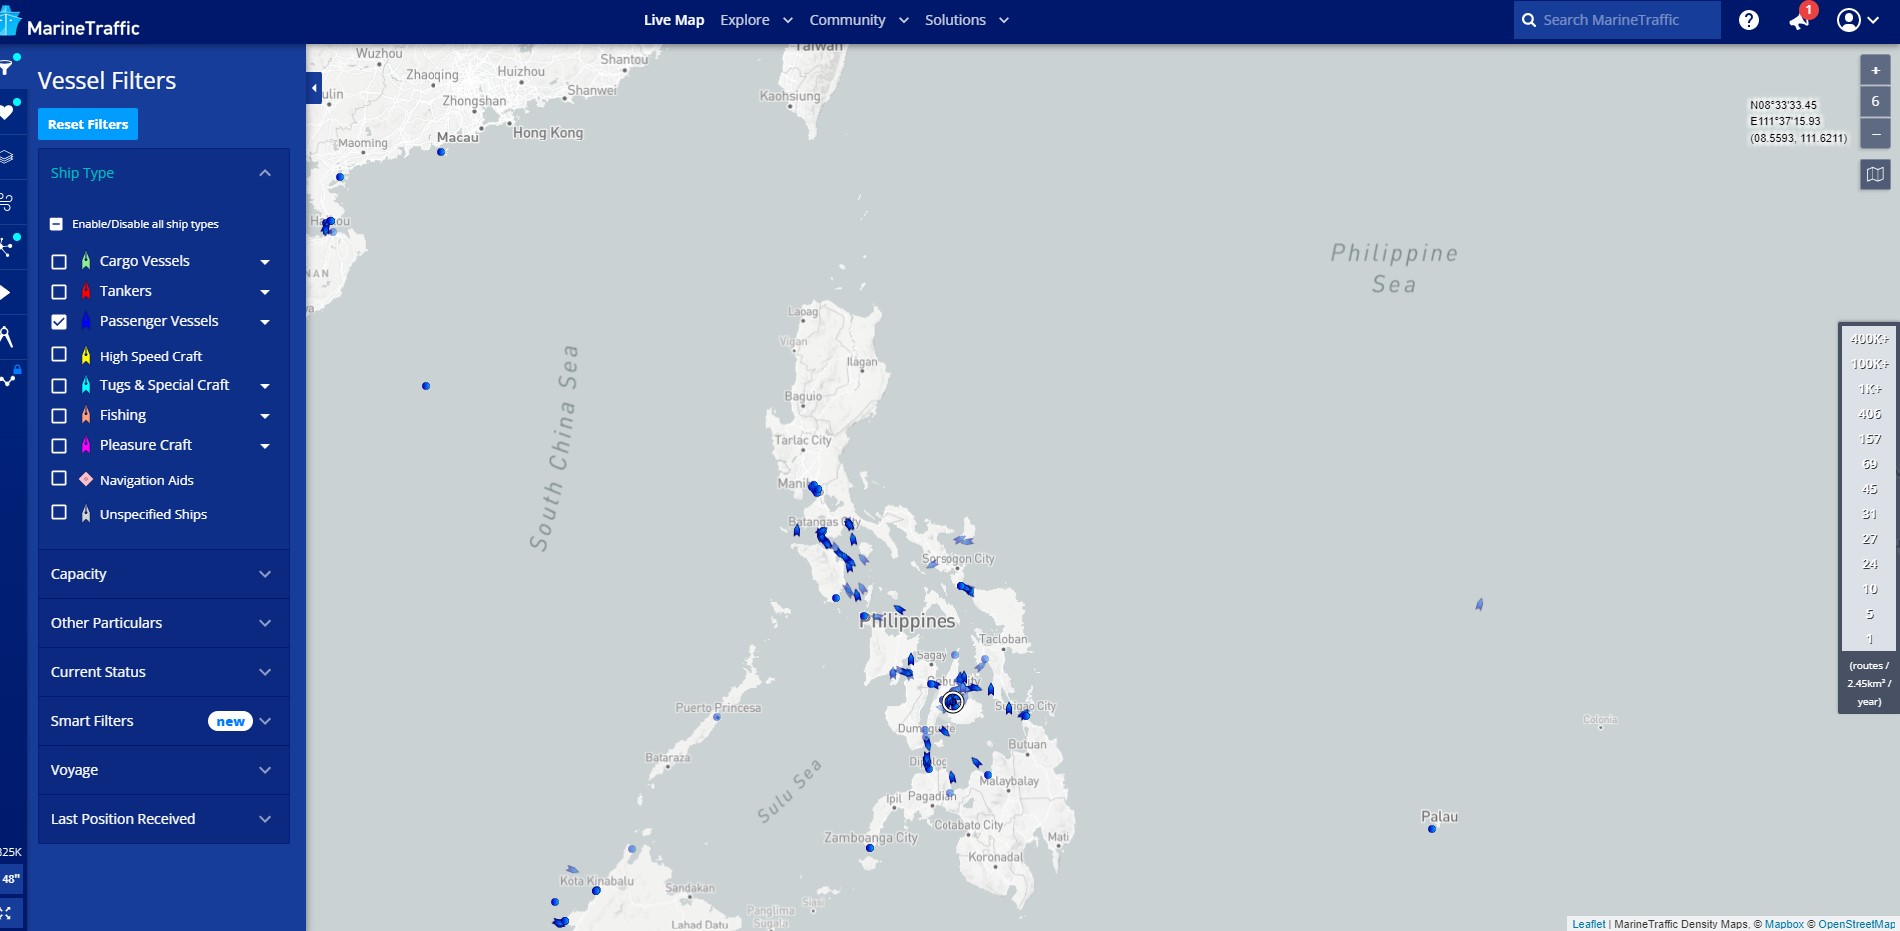 Passenger vessels operate around the Philippines’ coastlines, enabling inter-island movement for the population 